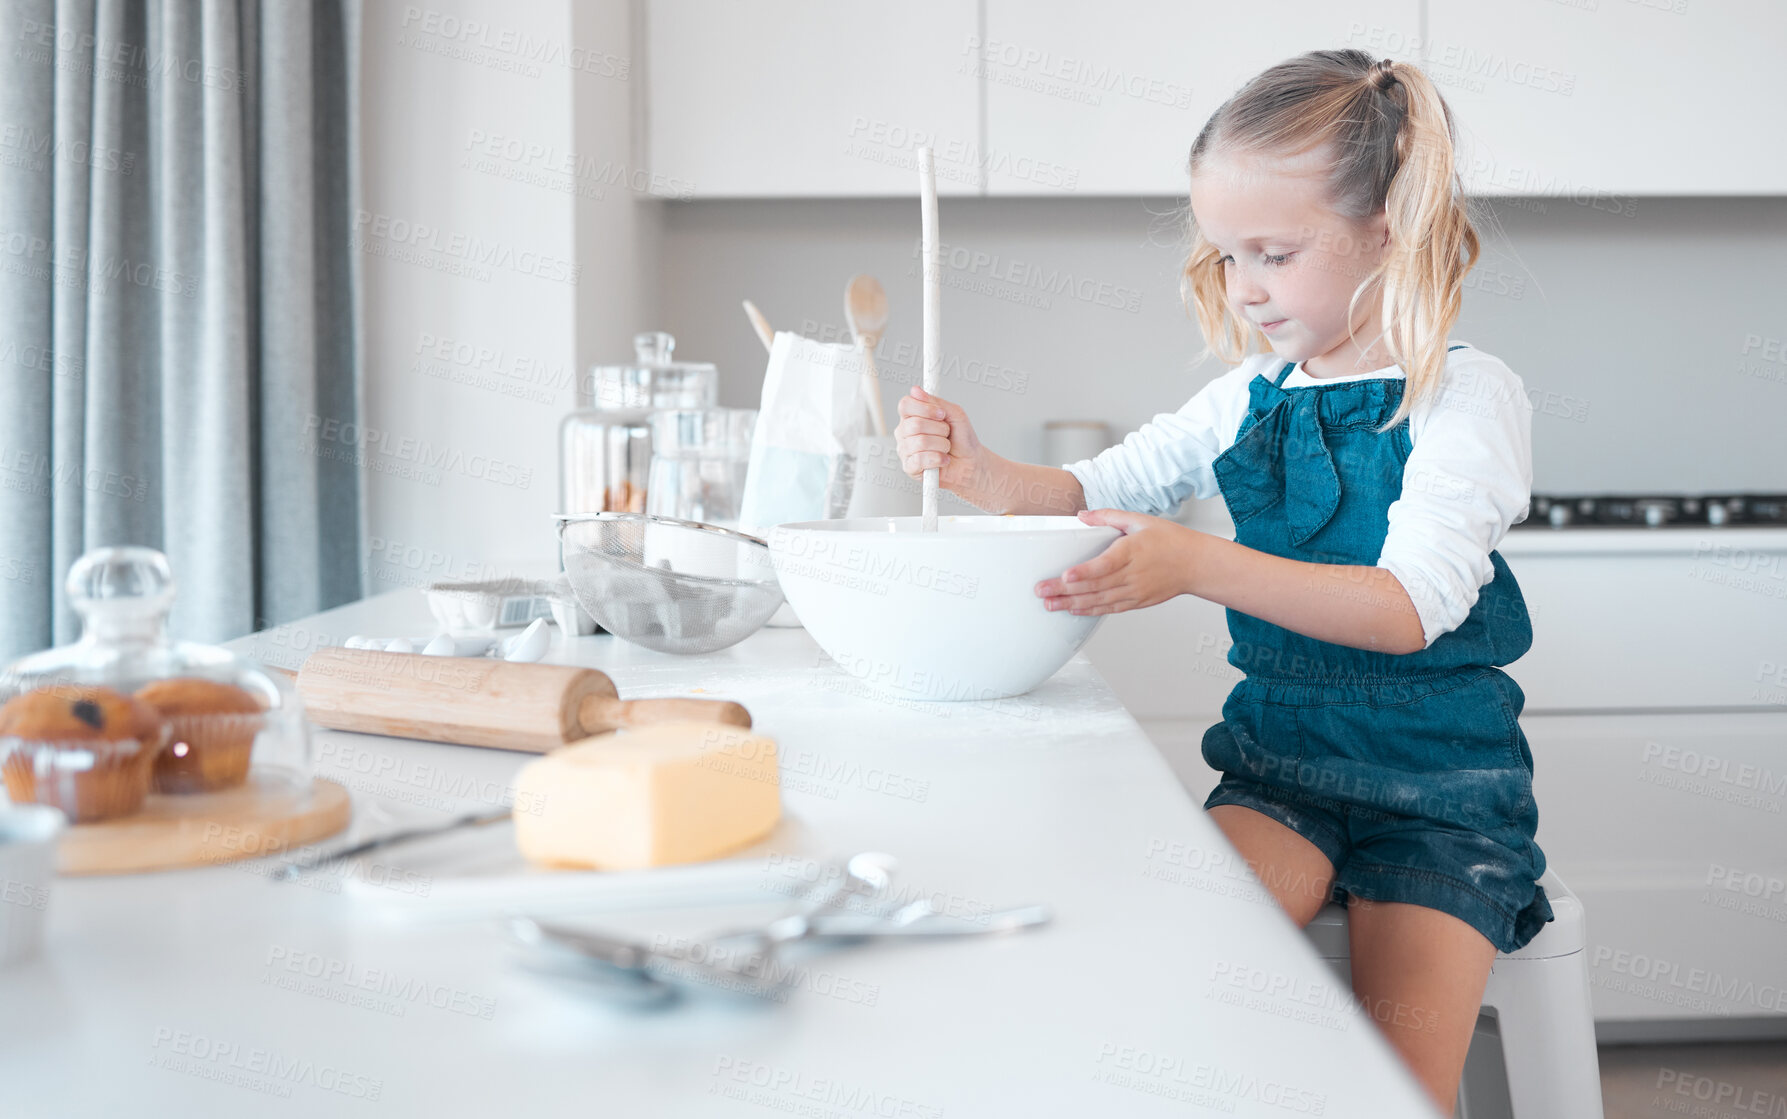 Buy stock photo Little girl mixing a bowl of batter. Young child baking alone in the kitchen. Little girl sitting at her kitchen counter. Caucasian girl holding a mixing bowl. Young child baking at home.